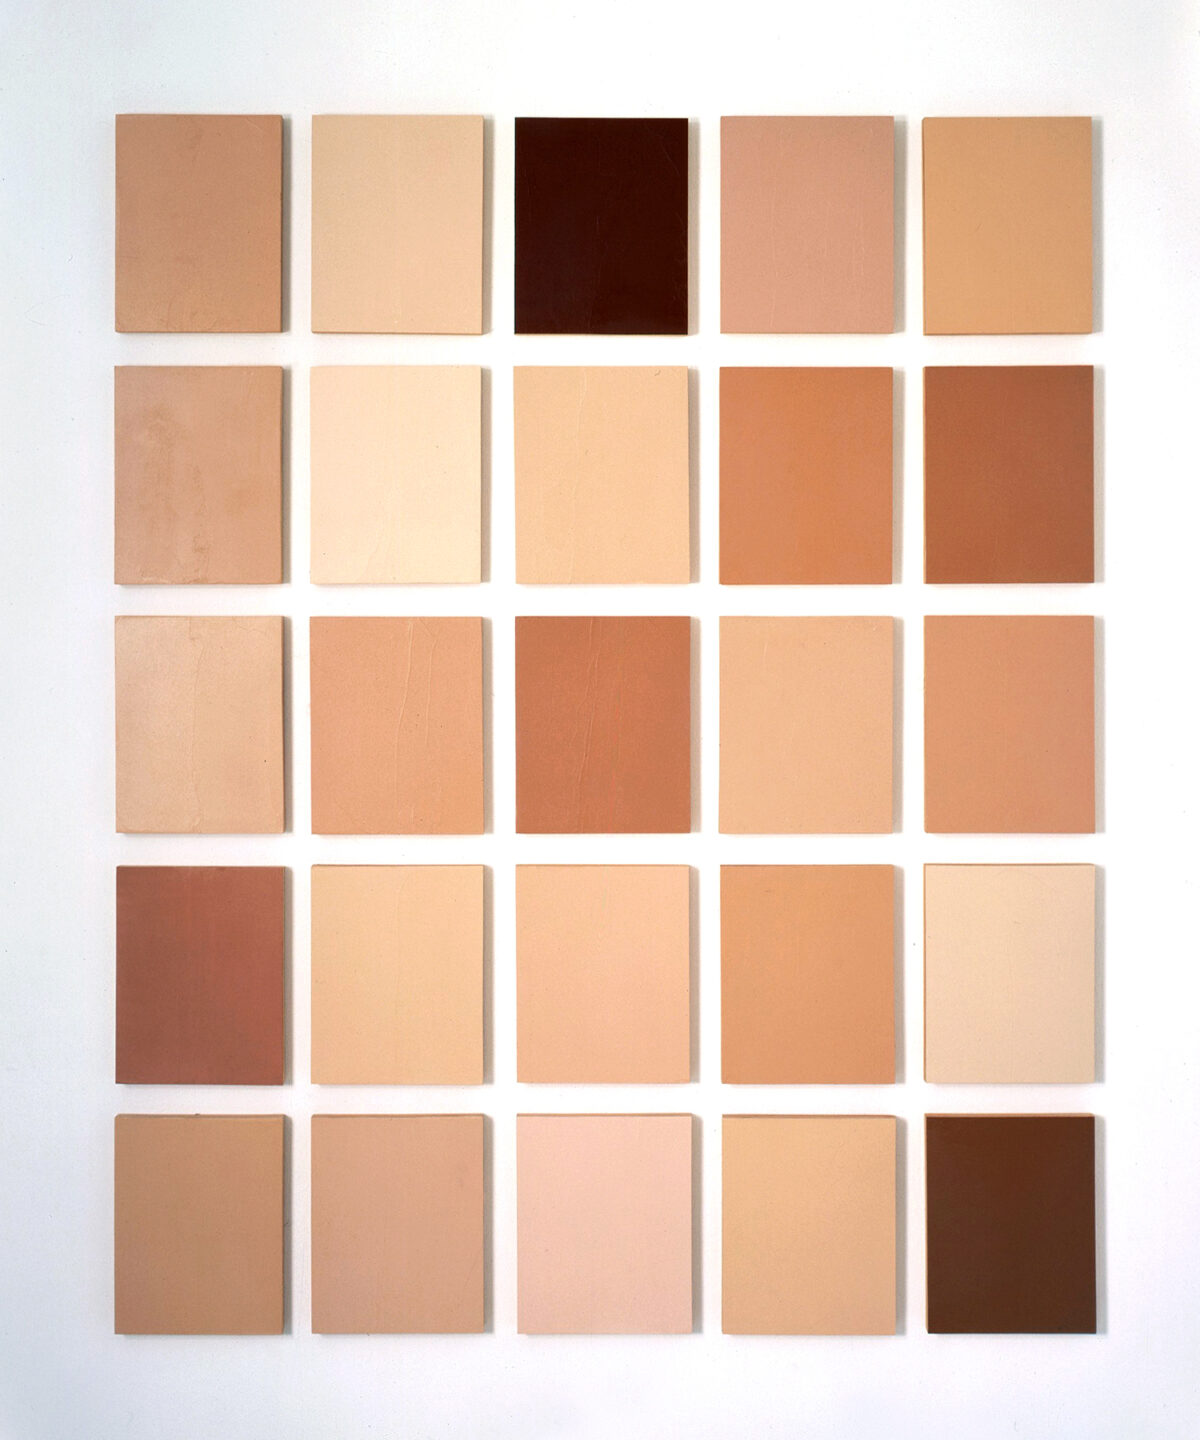 Separated square panels of different skin tones in a grid